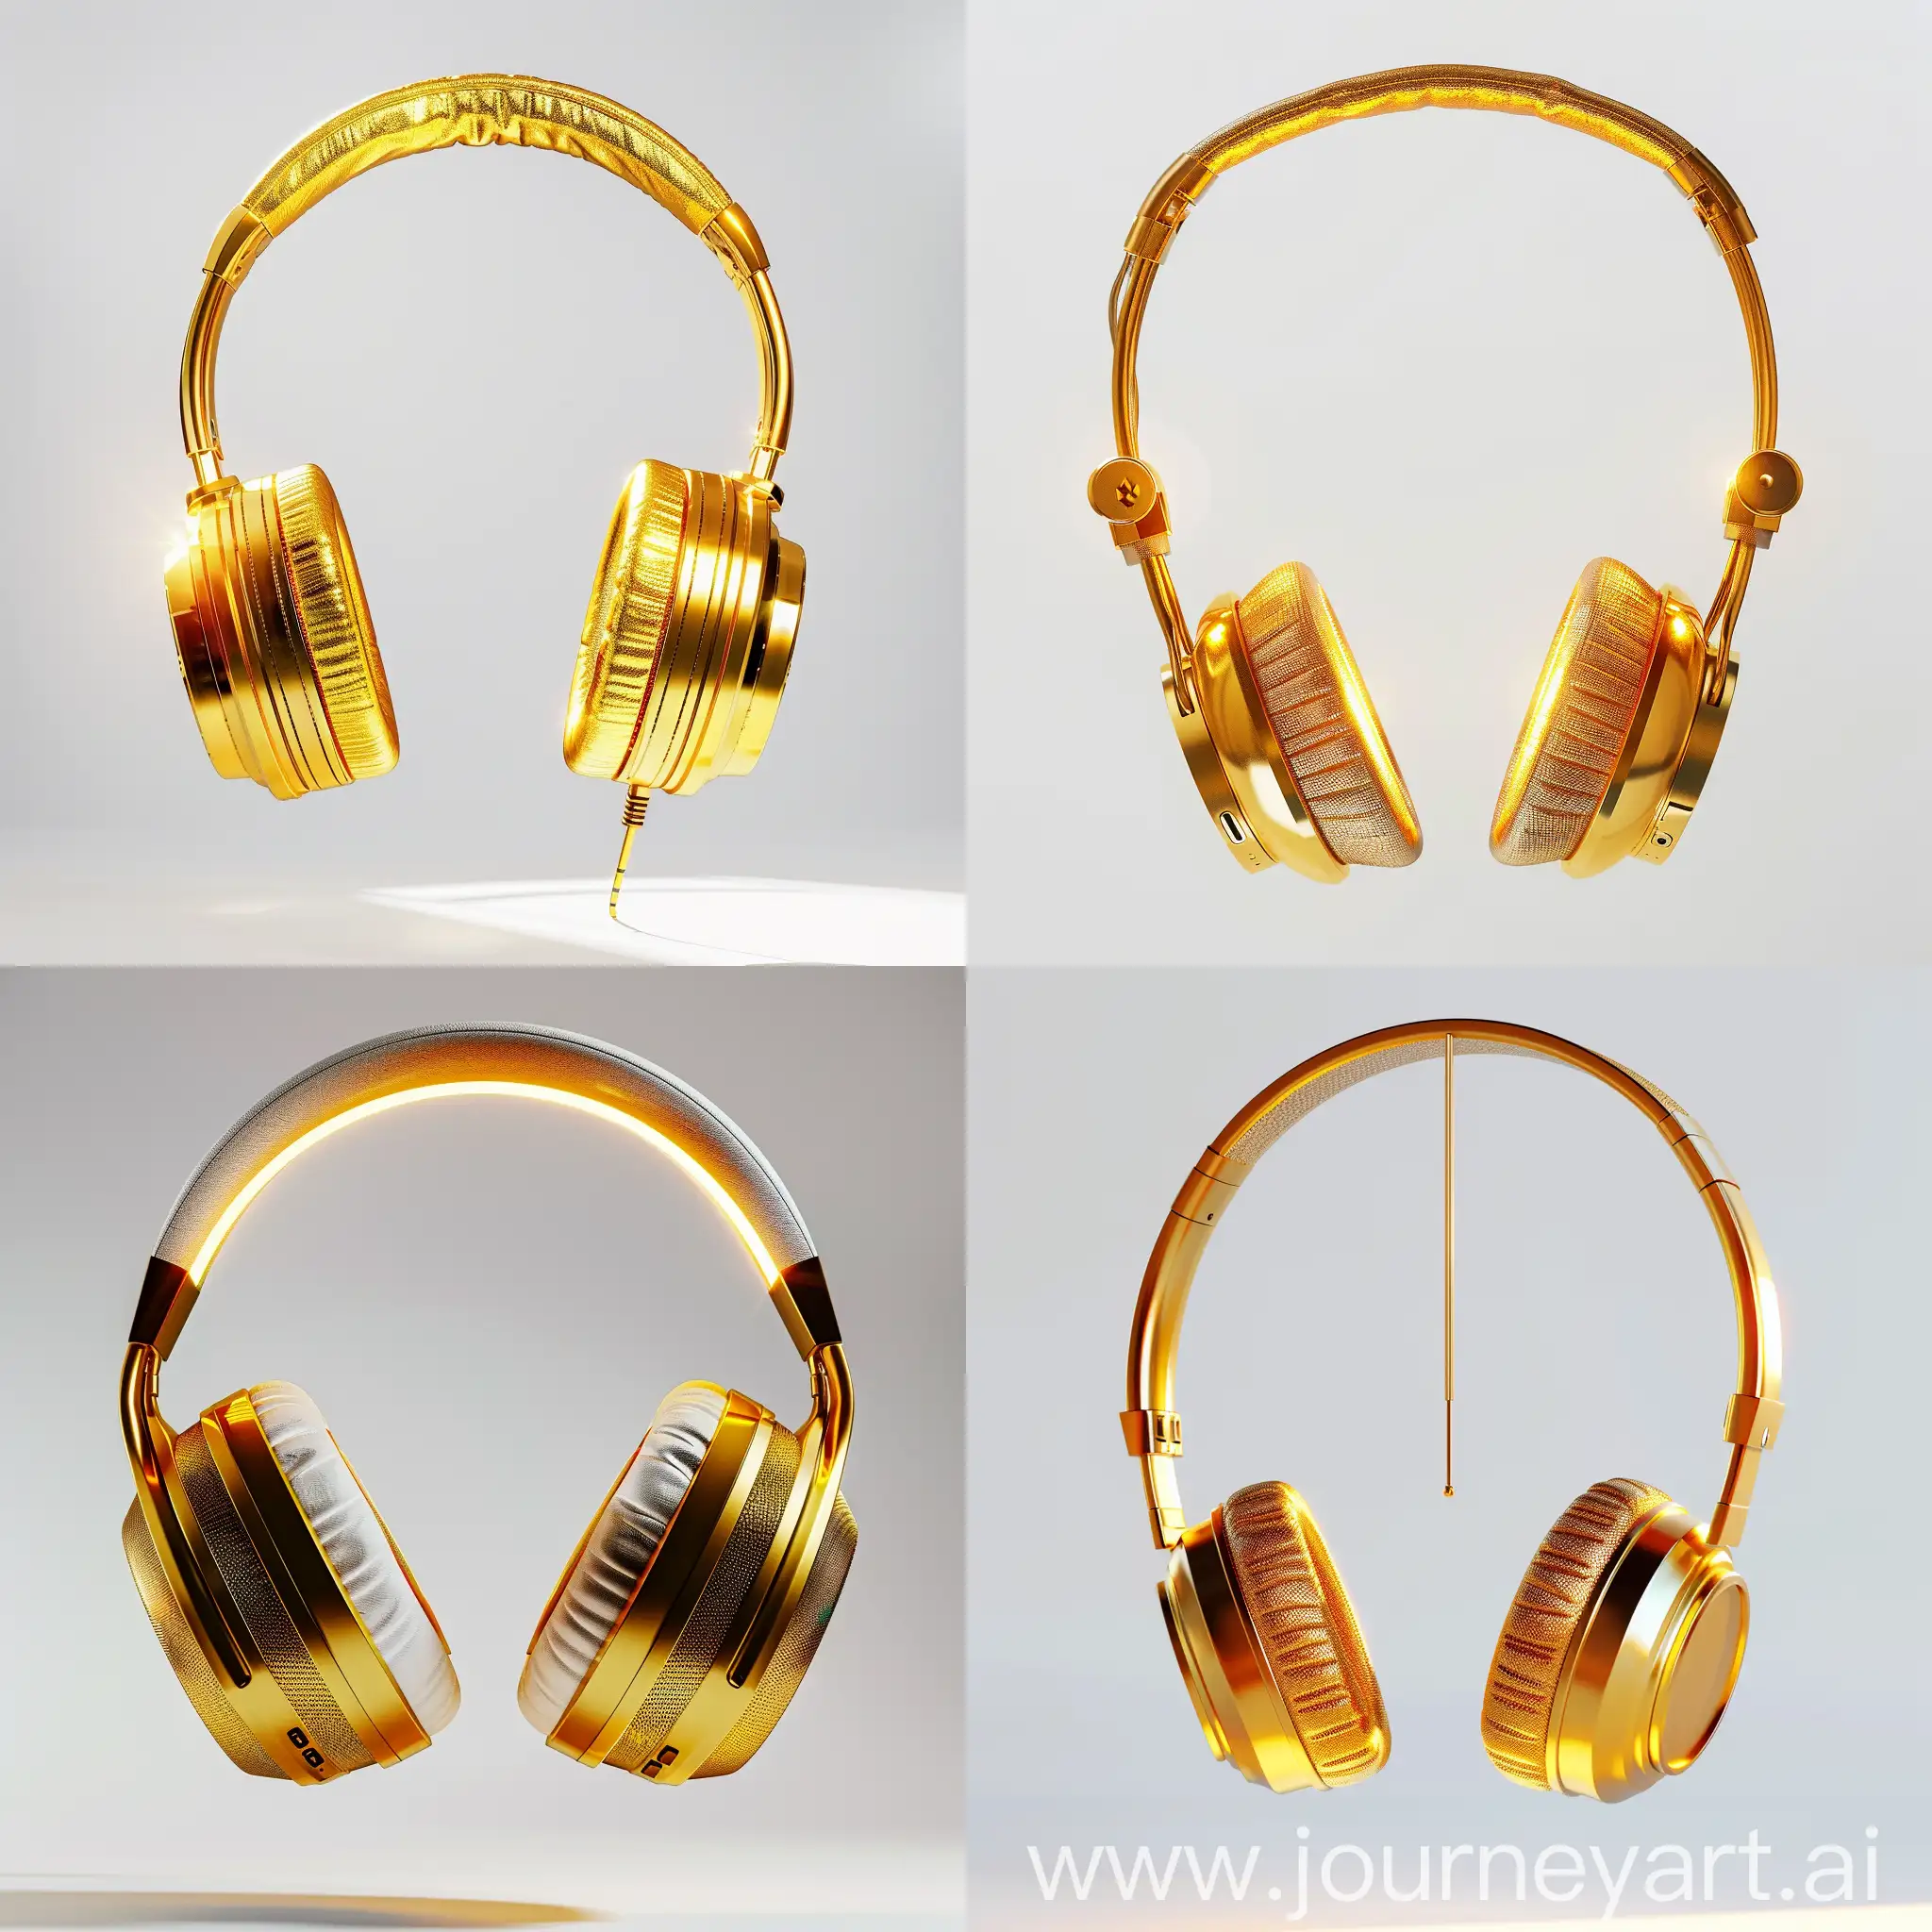 The photo of the golden headphones you have is a microphone
Simple design with light effect
The headphones are suspended in the air and the background is completely white and monochromatic without light
The highest quality and the most details